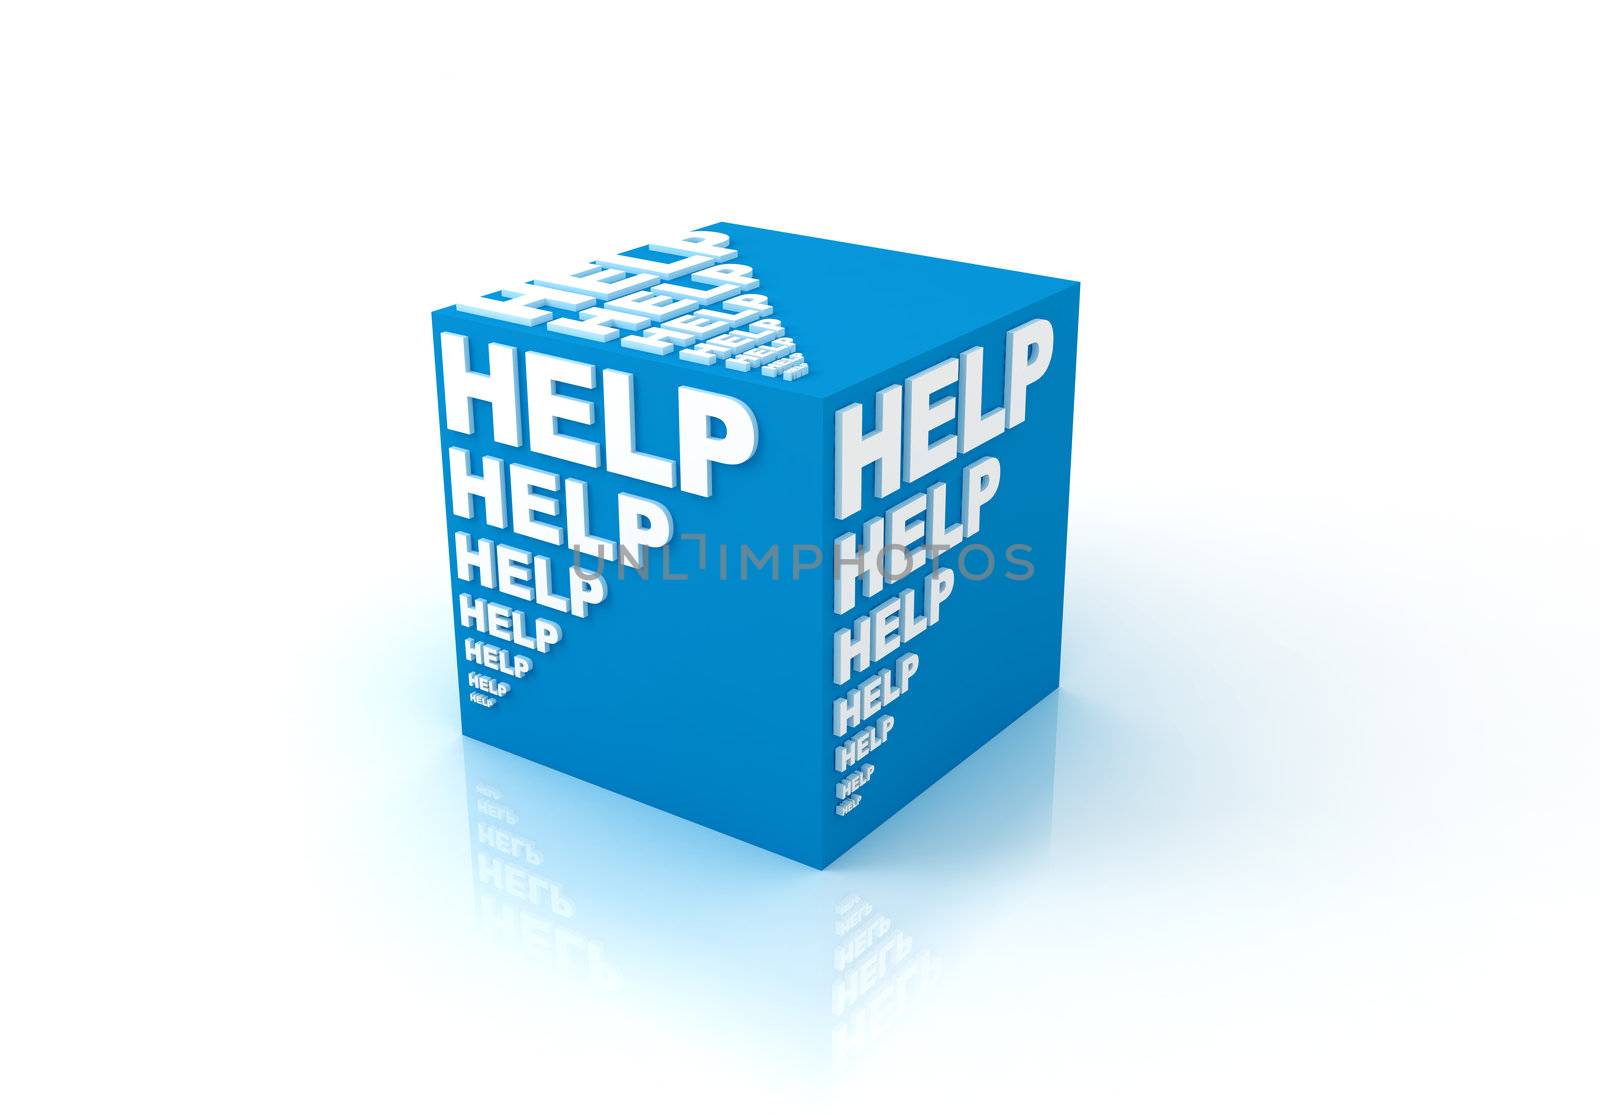 3d cubes with word "HELP" by aleksan